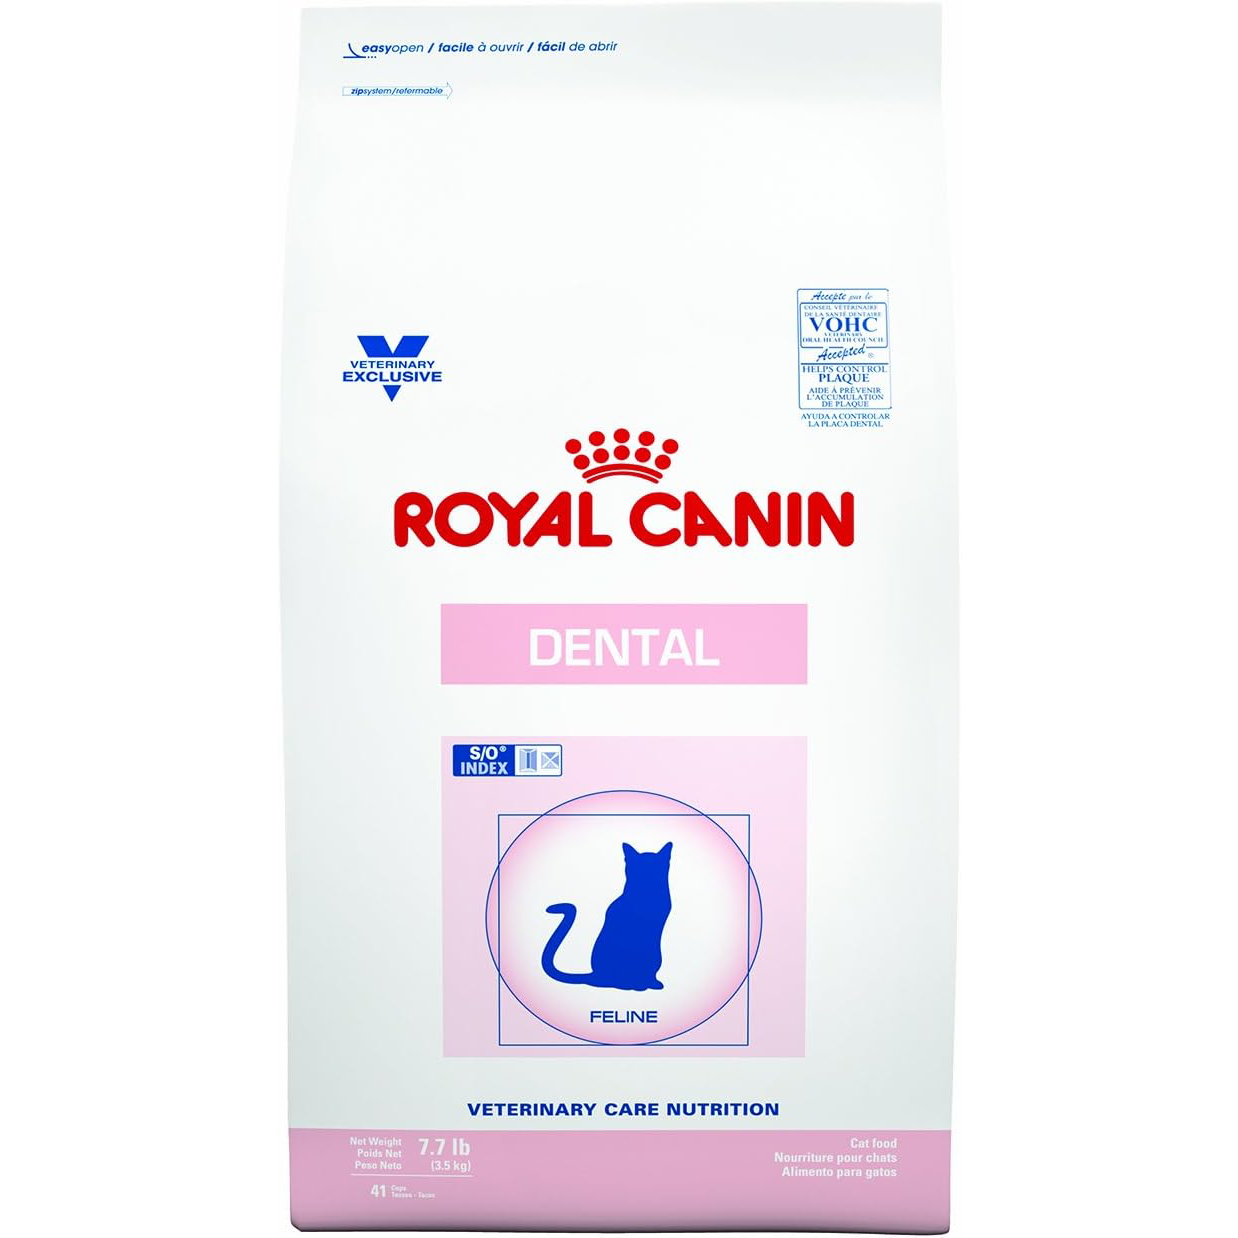 Royal Canin Feline Dental Cat Food Dry 7.7 Pound Bag (3.5 kg) For Cats and Kittens New